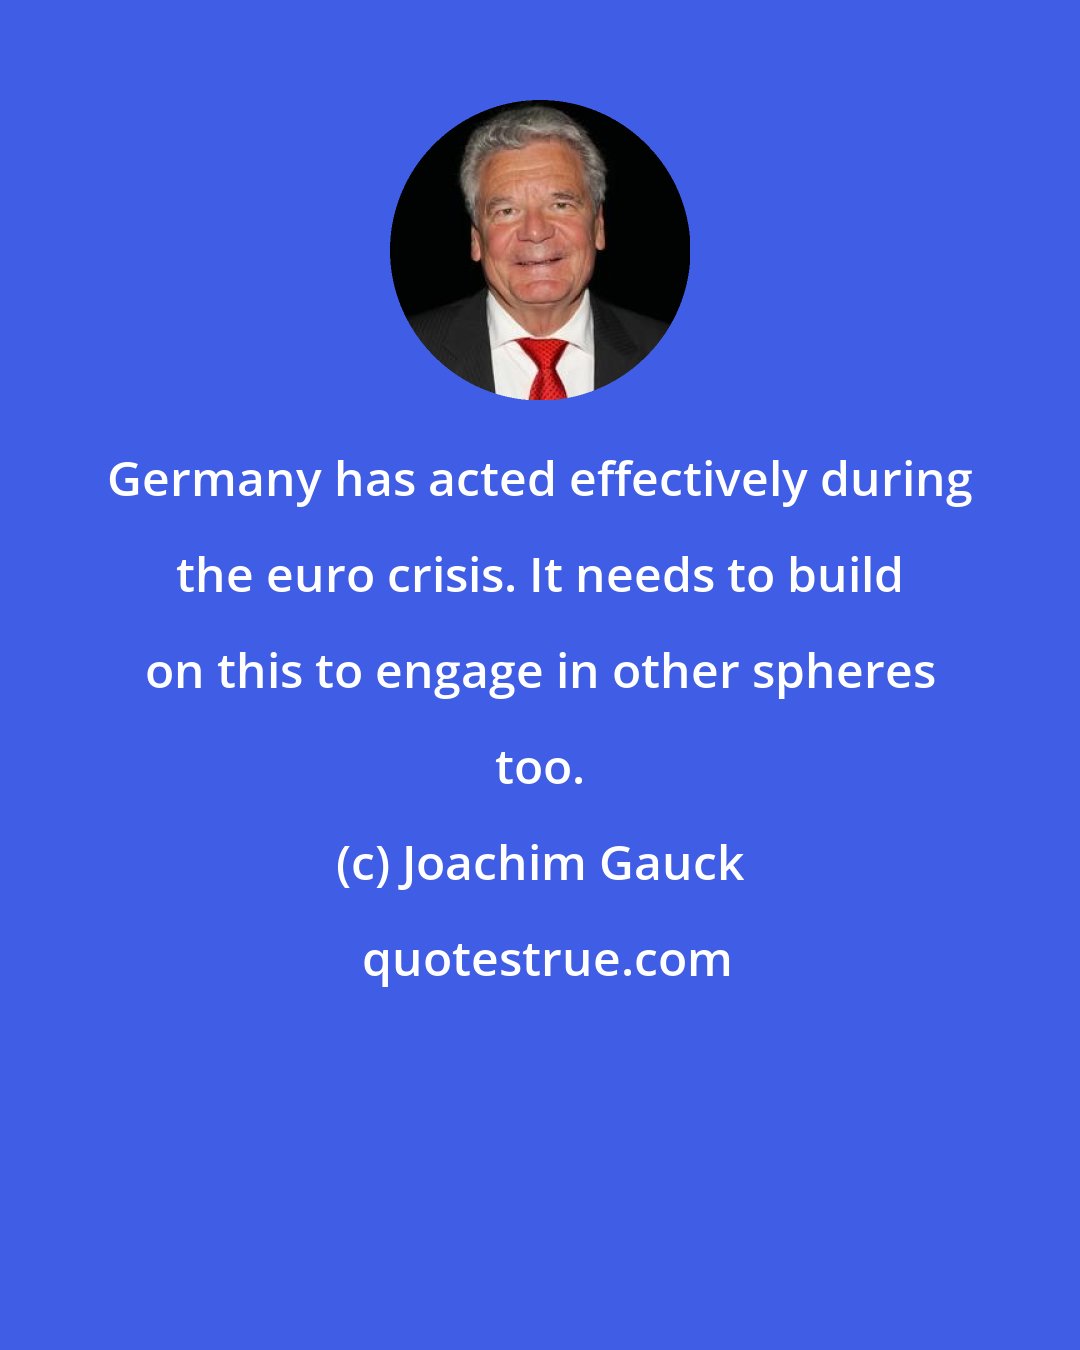 Joachim Gauck: Germany has acted effectively during the euro crisis. It needs to build on this to engage in other spheres too.